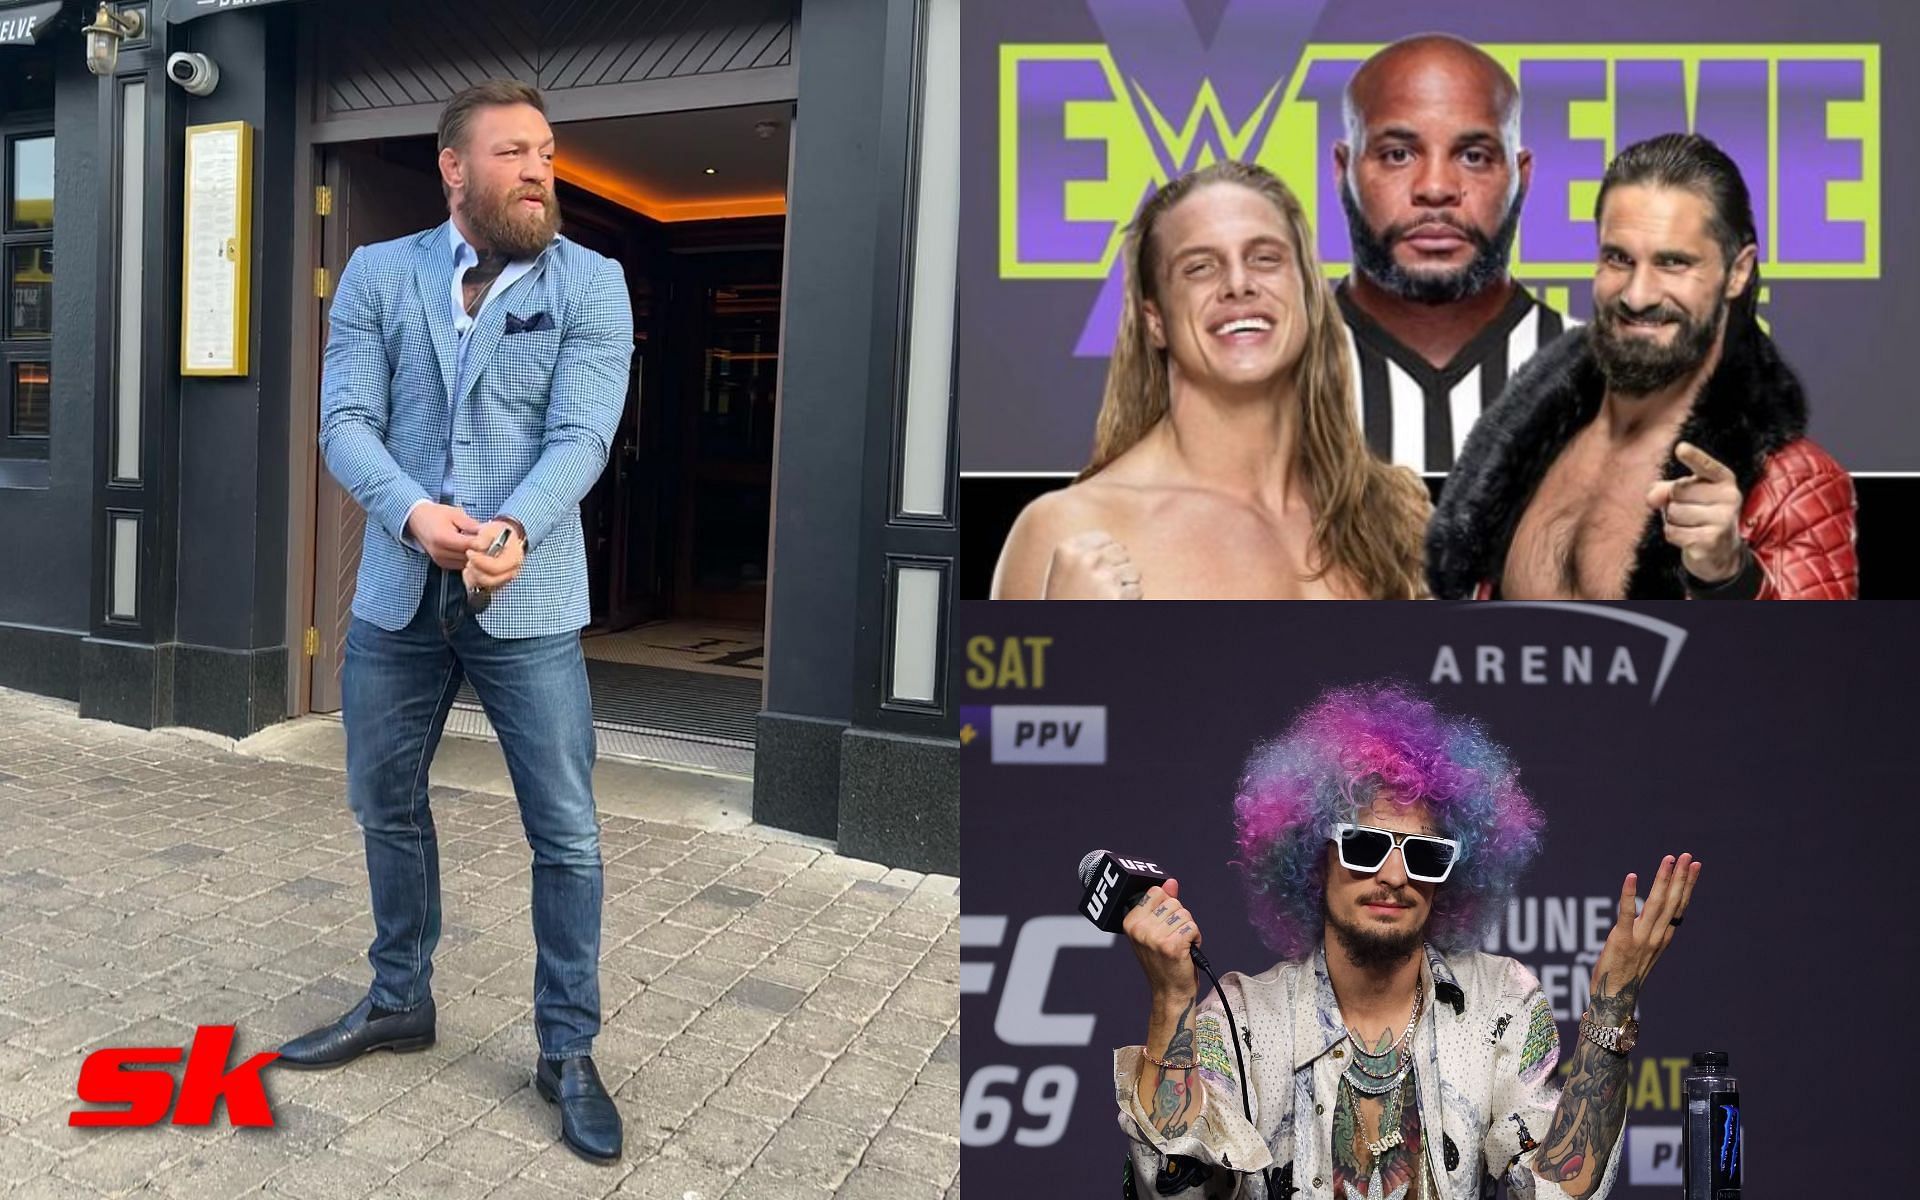 Conor McGregor (left - via @thenotoriousmma on IG), Daniel Cormier with Matt Riddle and Seth Rollins (top right - via @arielhelwani on Twitter), Sean O